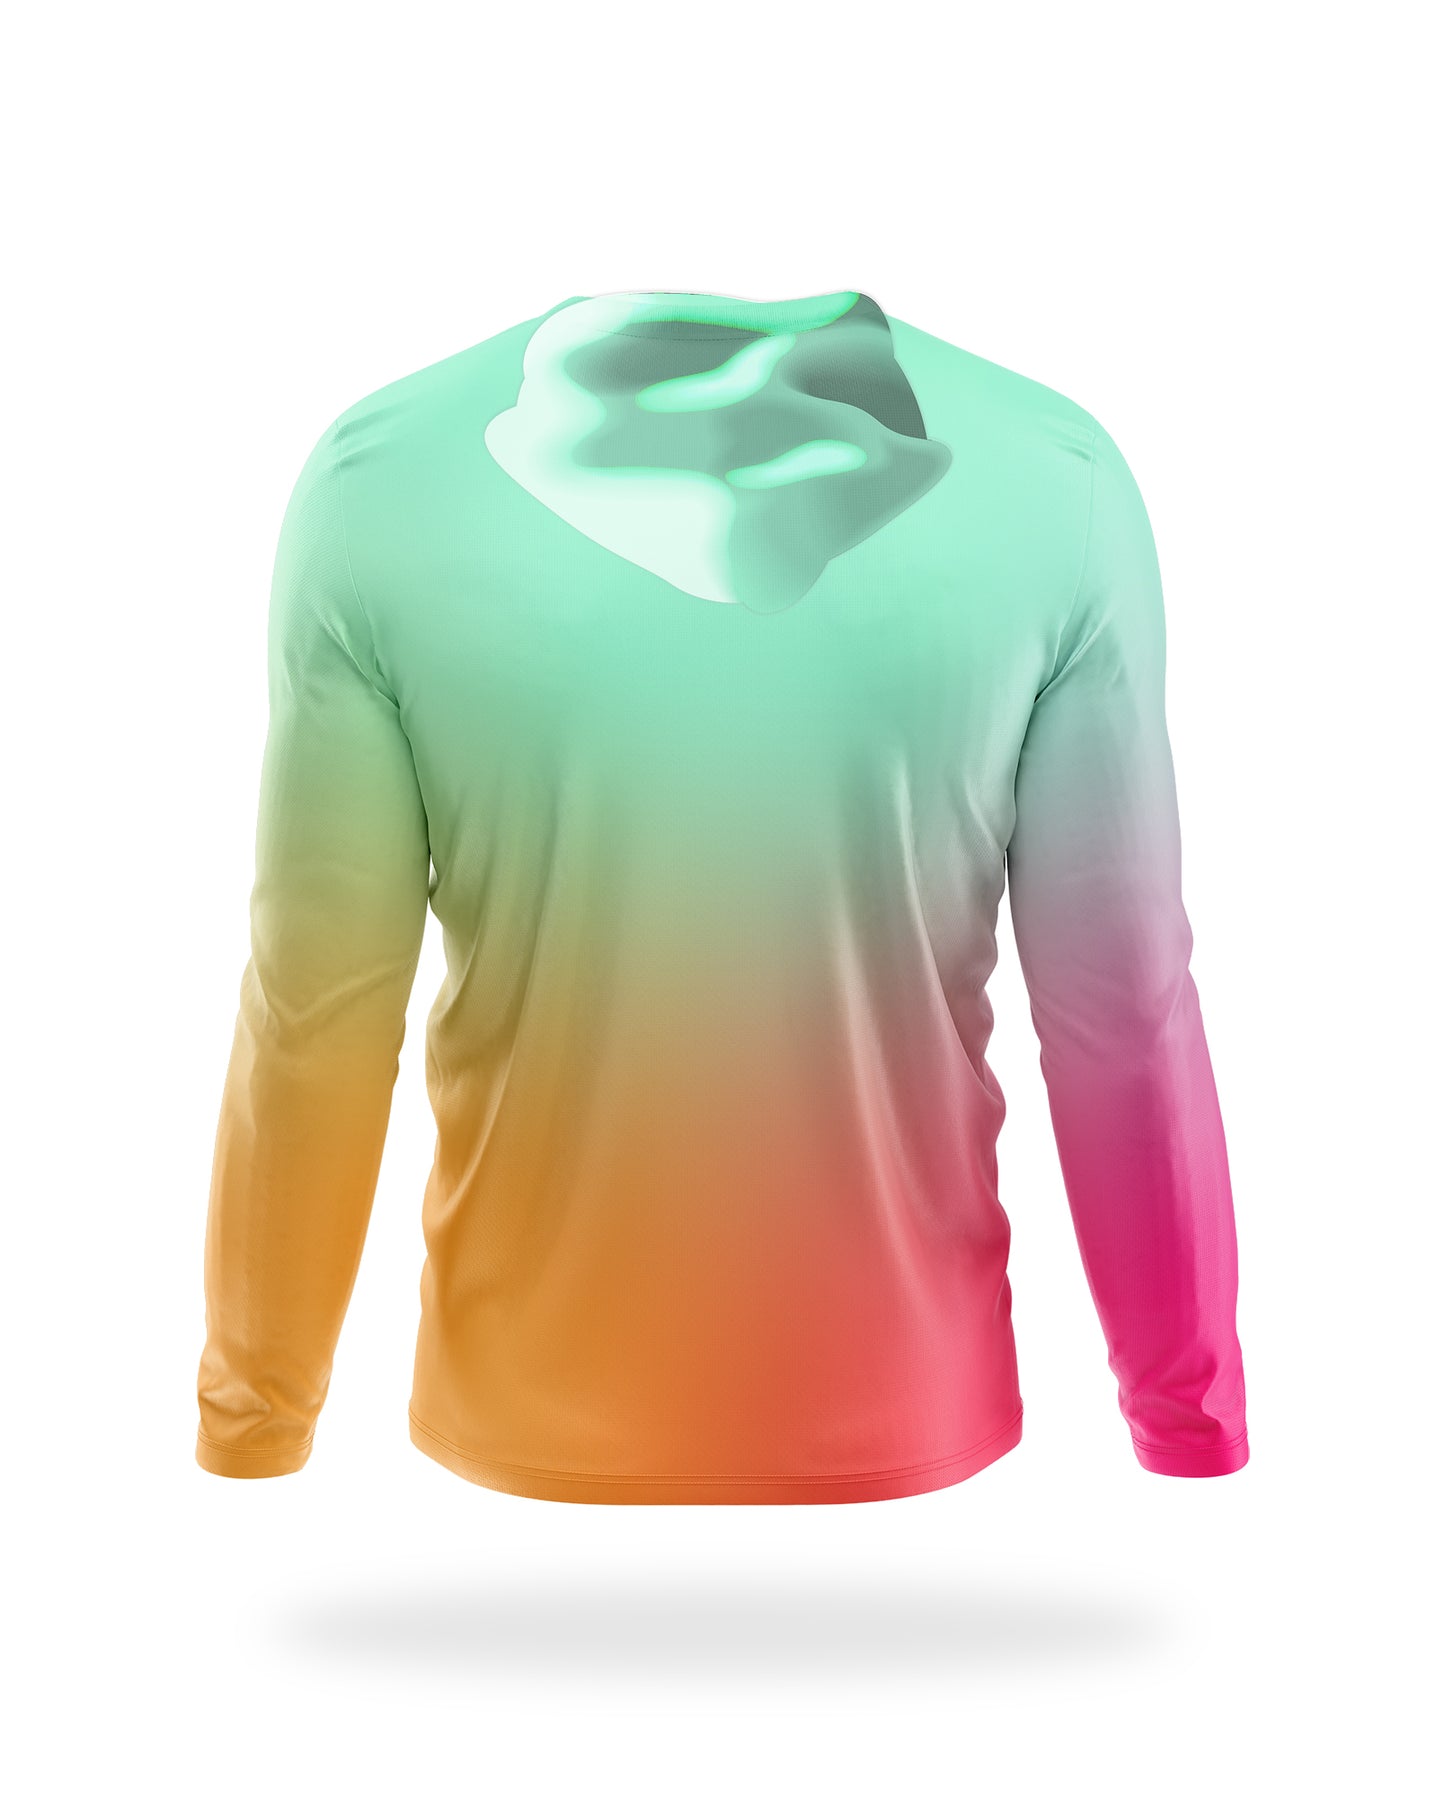 Men's Rainbow Hoodie - DUE AT THE END OF FEBRUARY